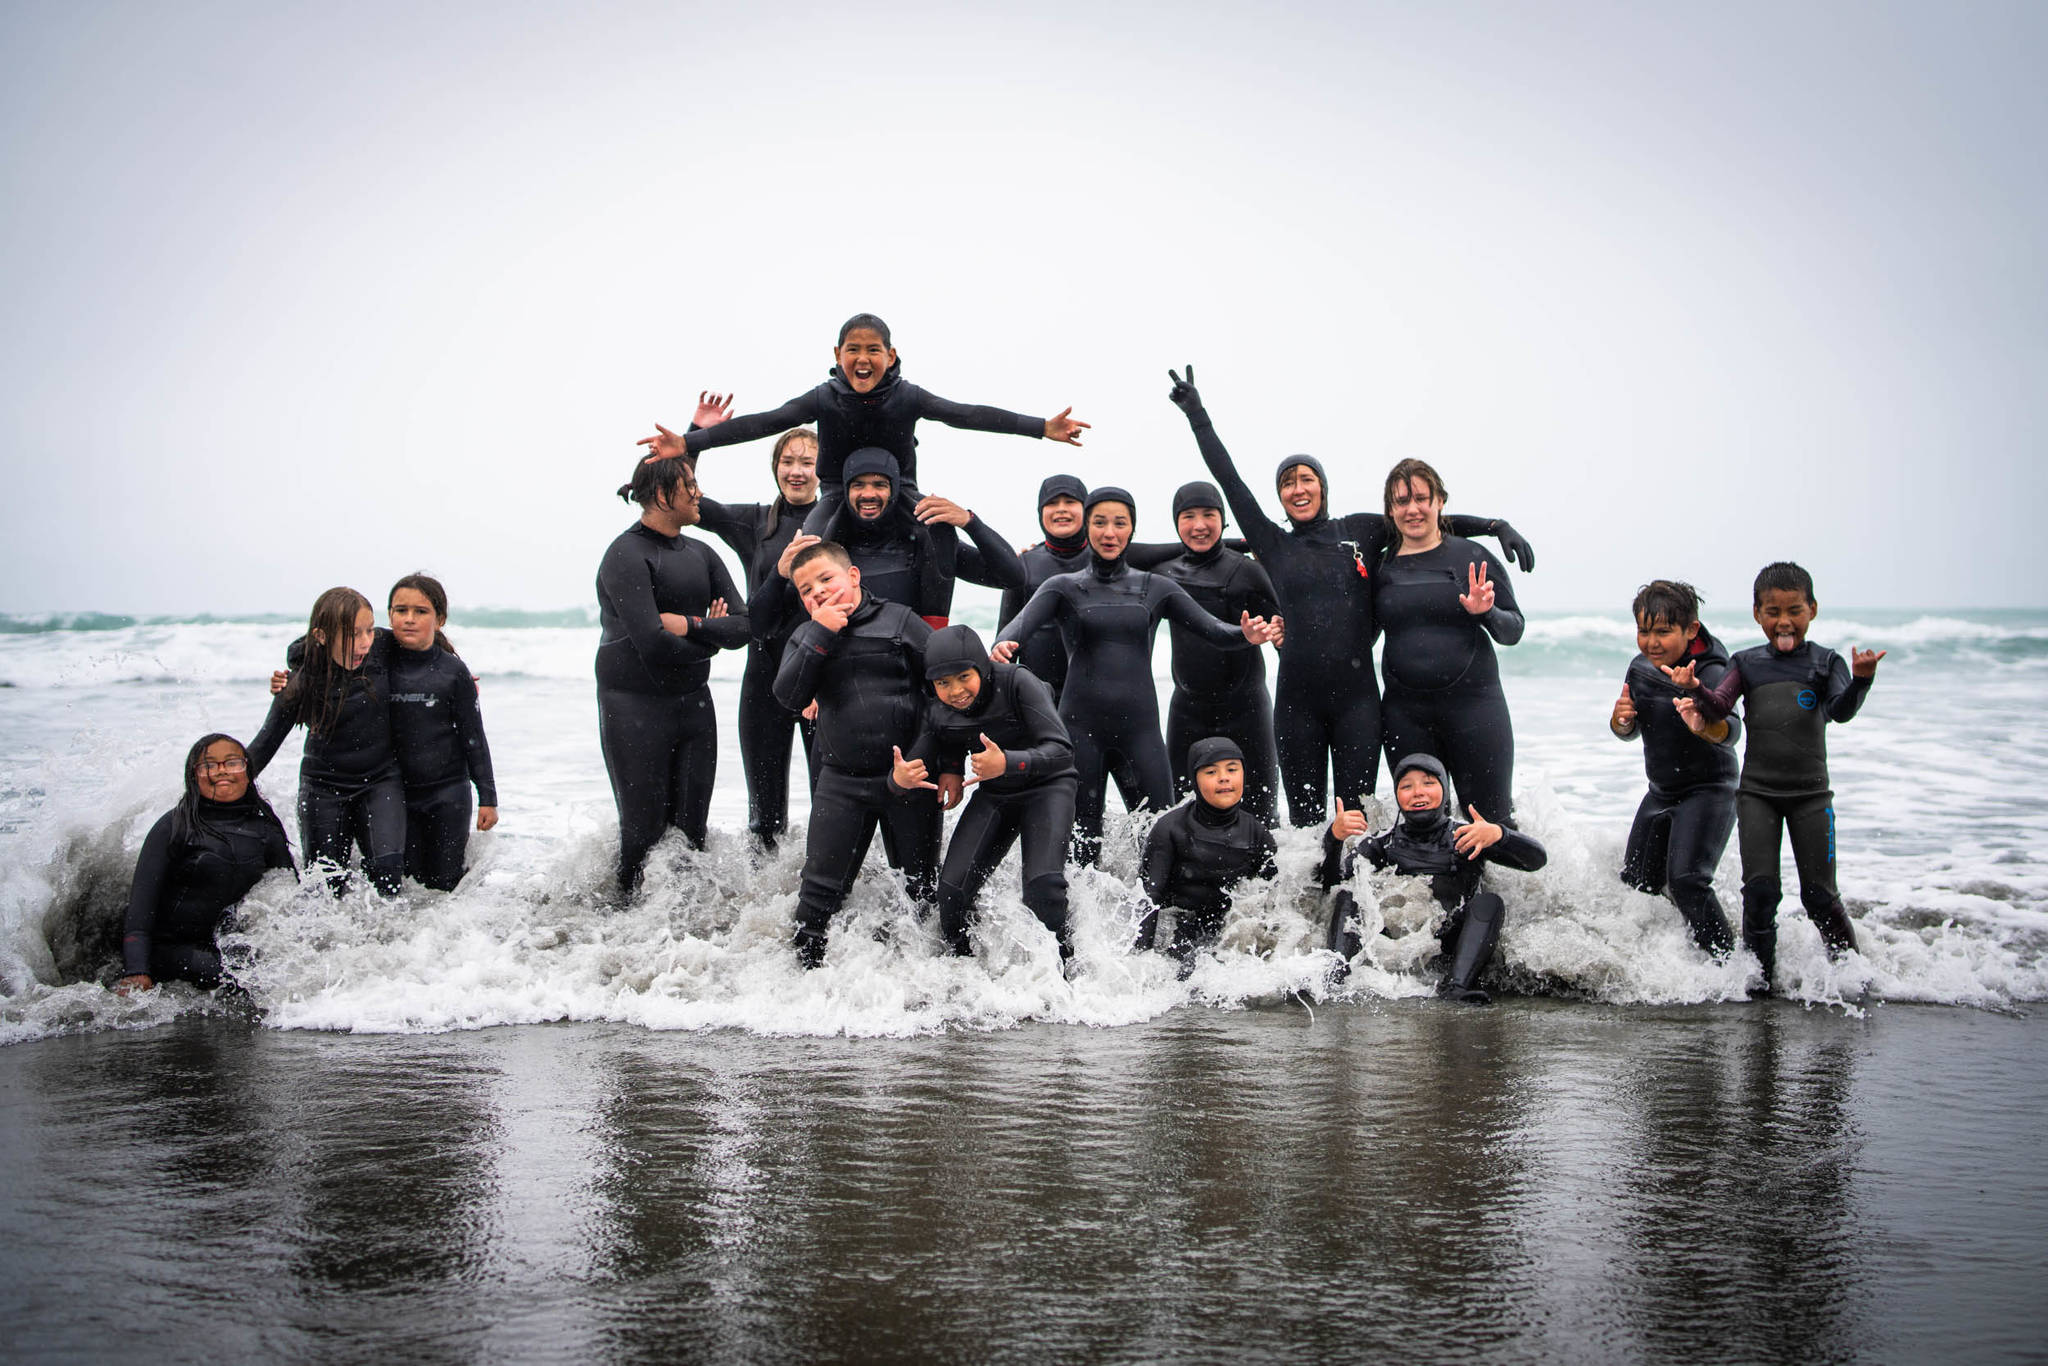 Yakutat Surf Club creates community and allows youth of all ages to forge strong friendships while encouraging each other in the break. Participants pose with coaches Chelsea Jolly and Ryan Cortes. (Courtesy Photo / Bethany Sonsini Goodrich)